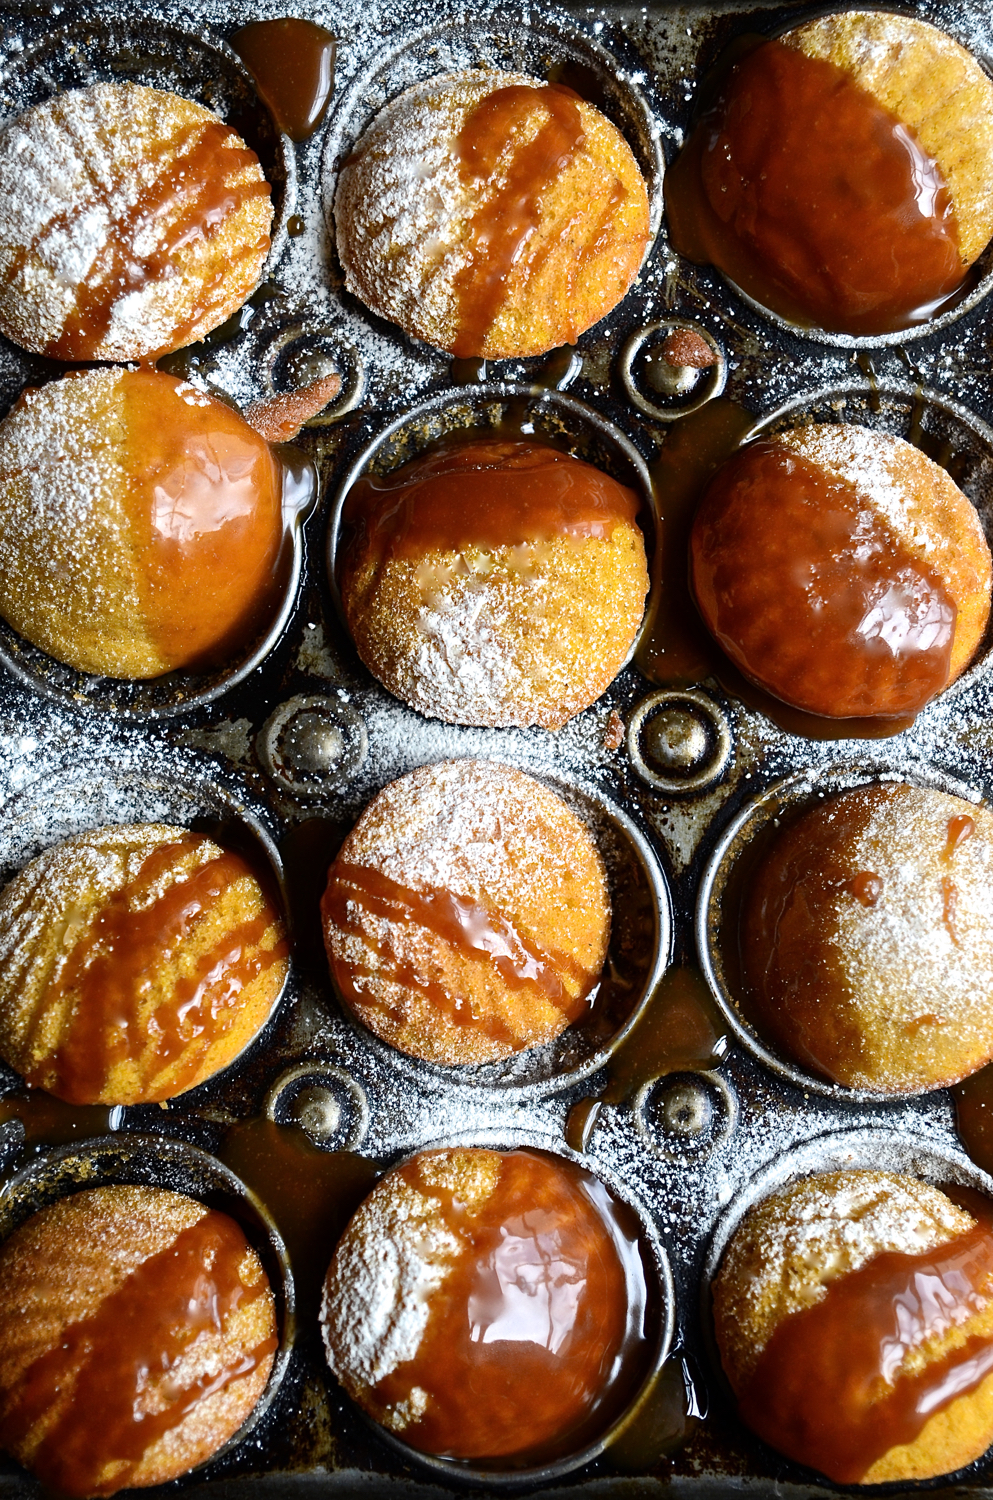 Pumpkin madeleines with caramel drizzle